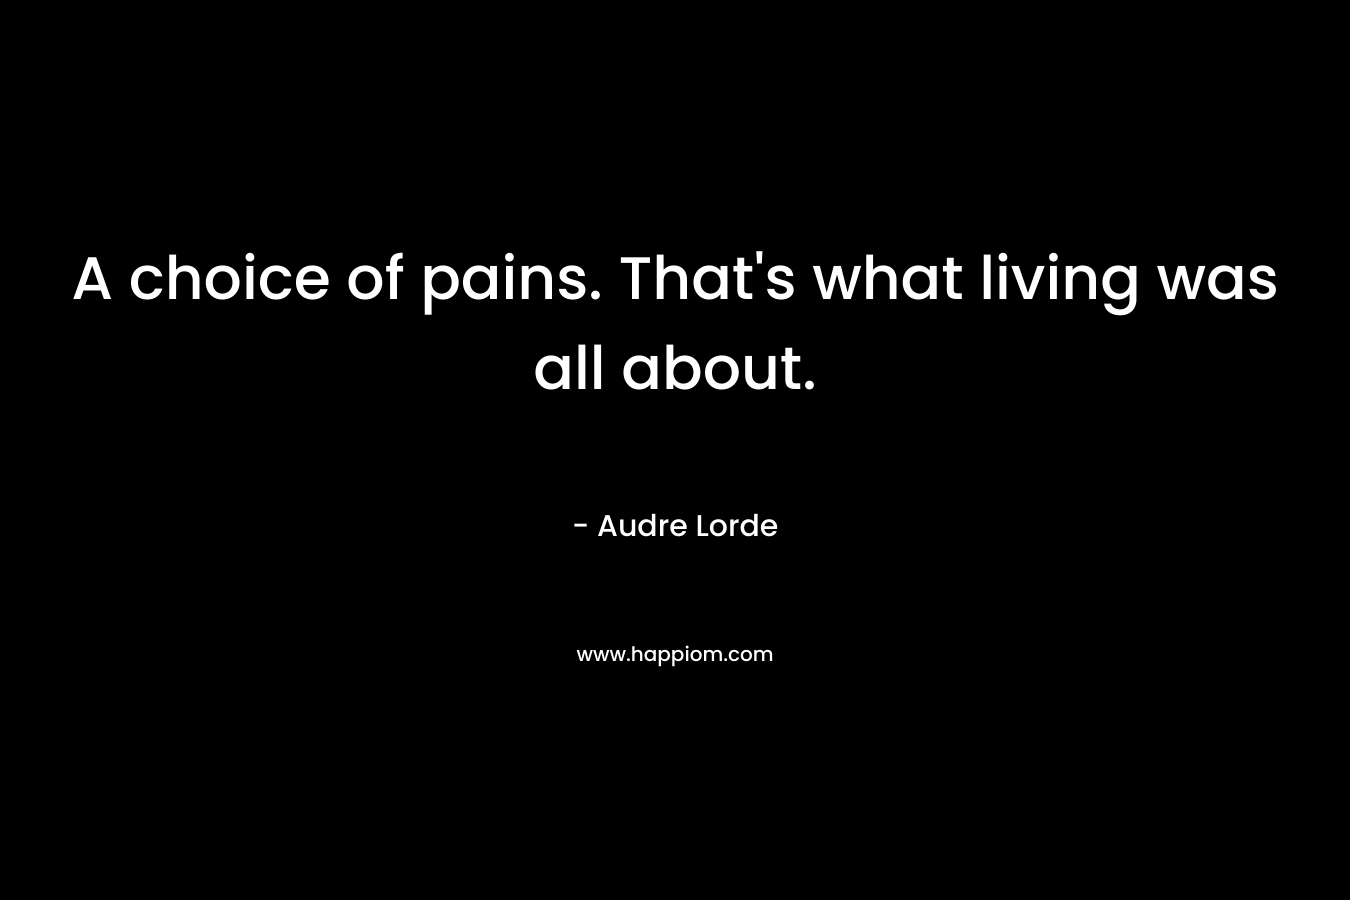 A choice of pains. That’s what living was all about. – Audre Lorde